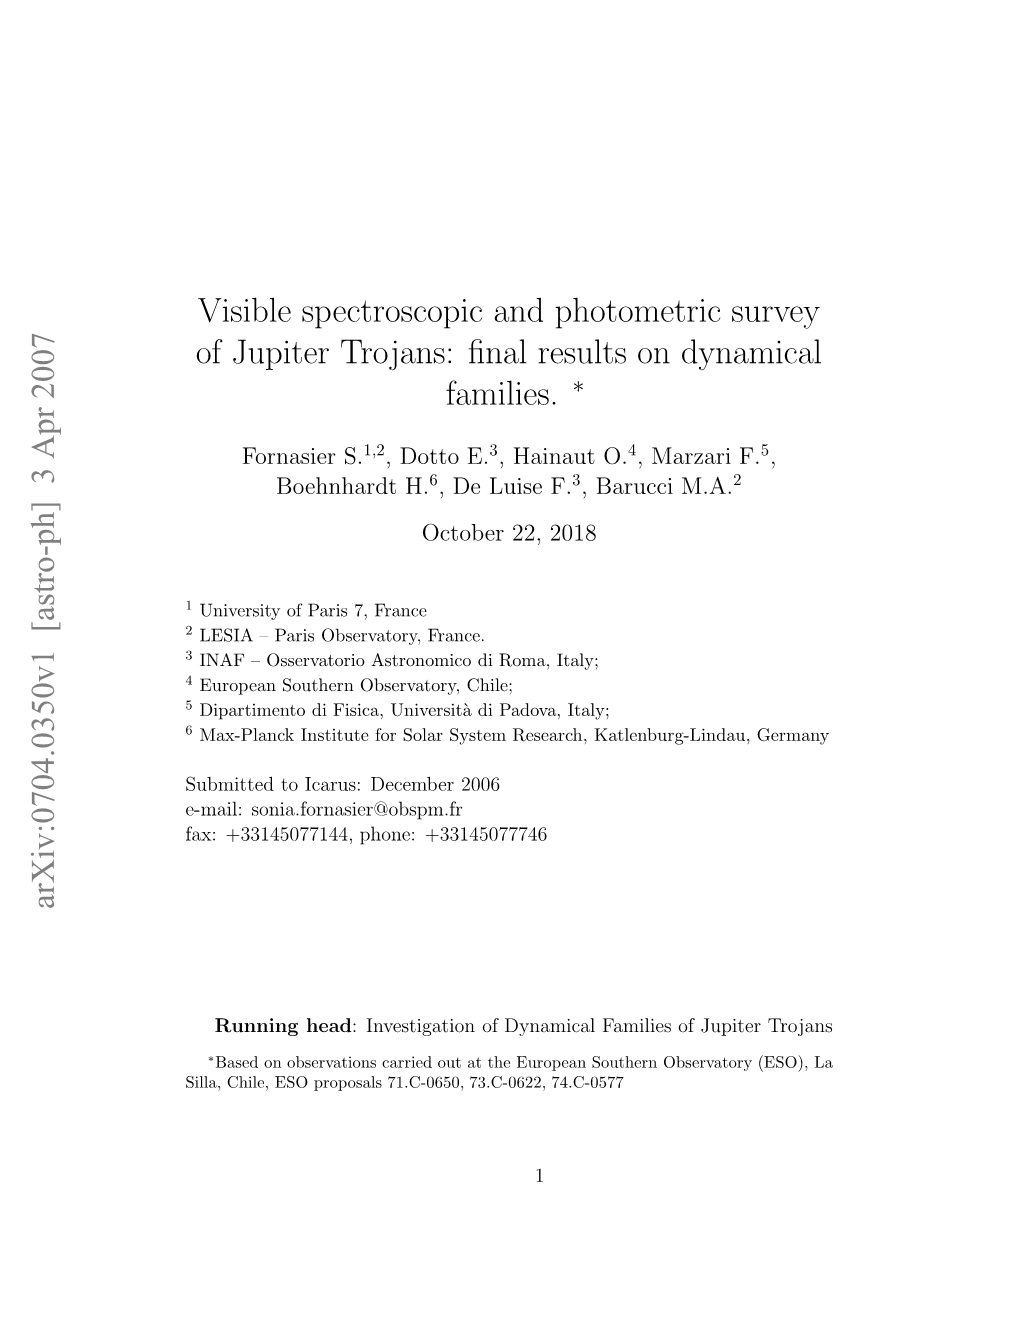 Visible Spectroscopic and Photometric Survey of Jupiter Trojans: Final